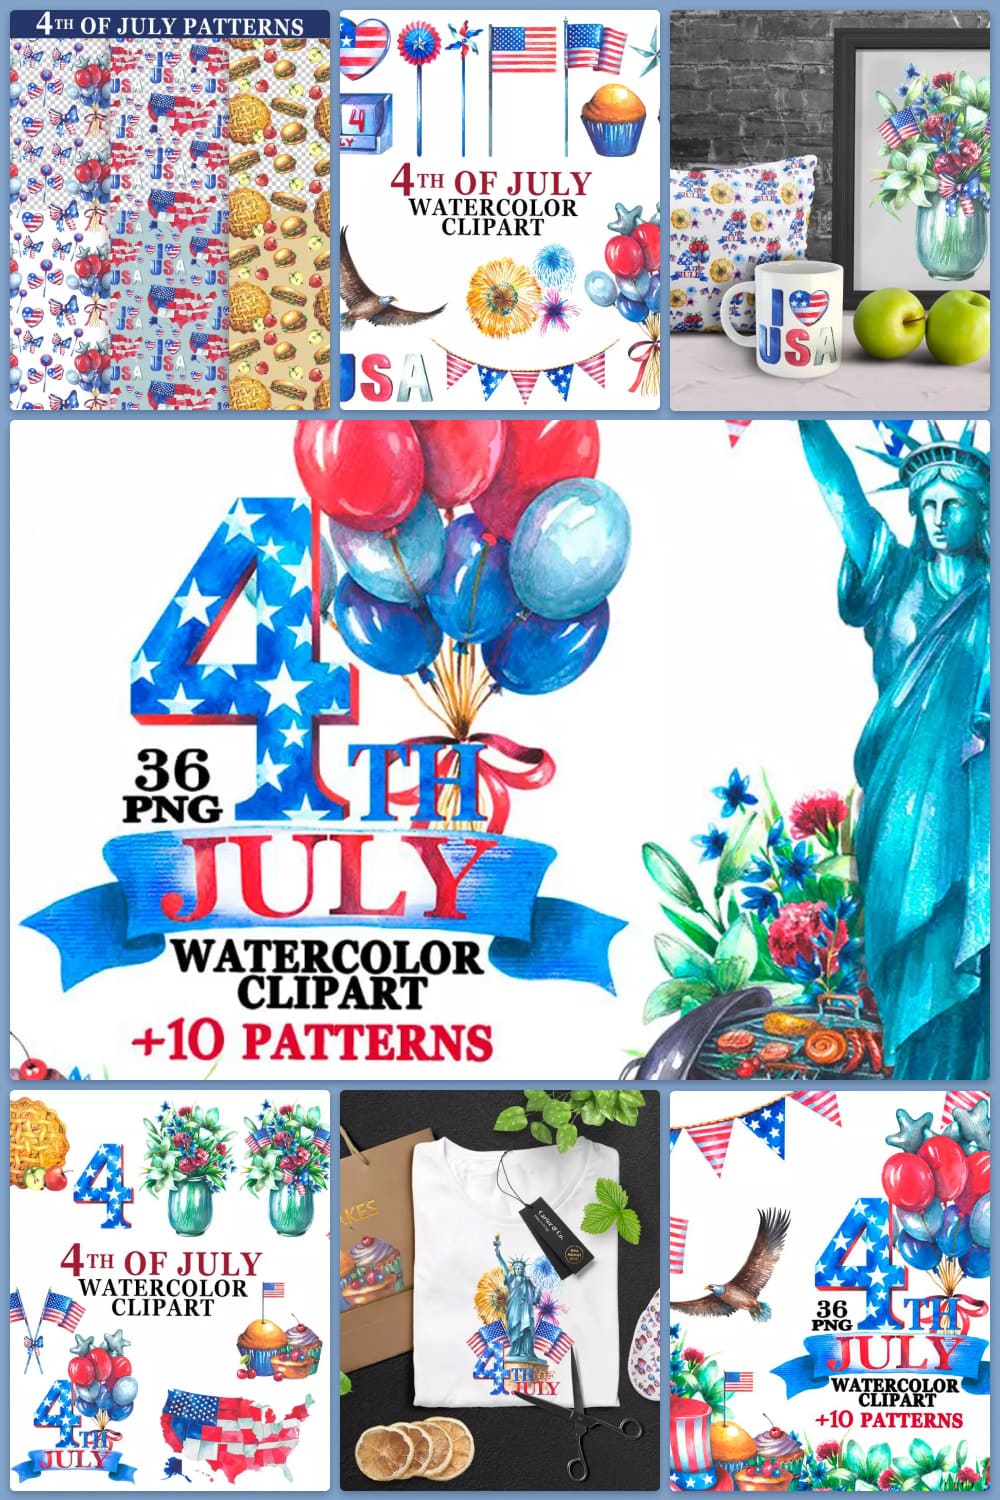 Statue of Liberty, balloons, flags, drawings in the colors of the American flag.